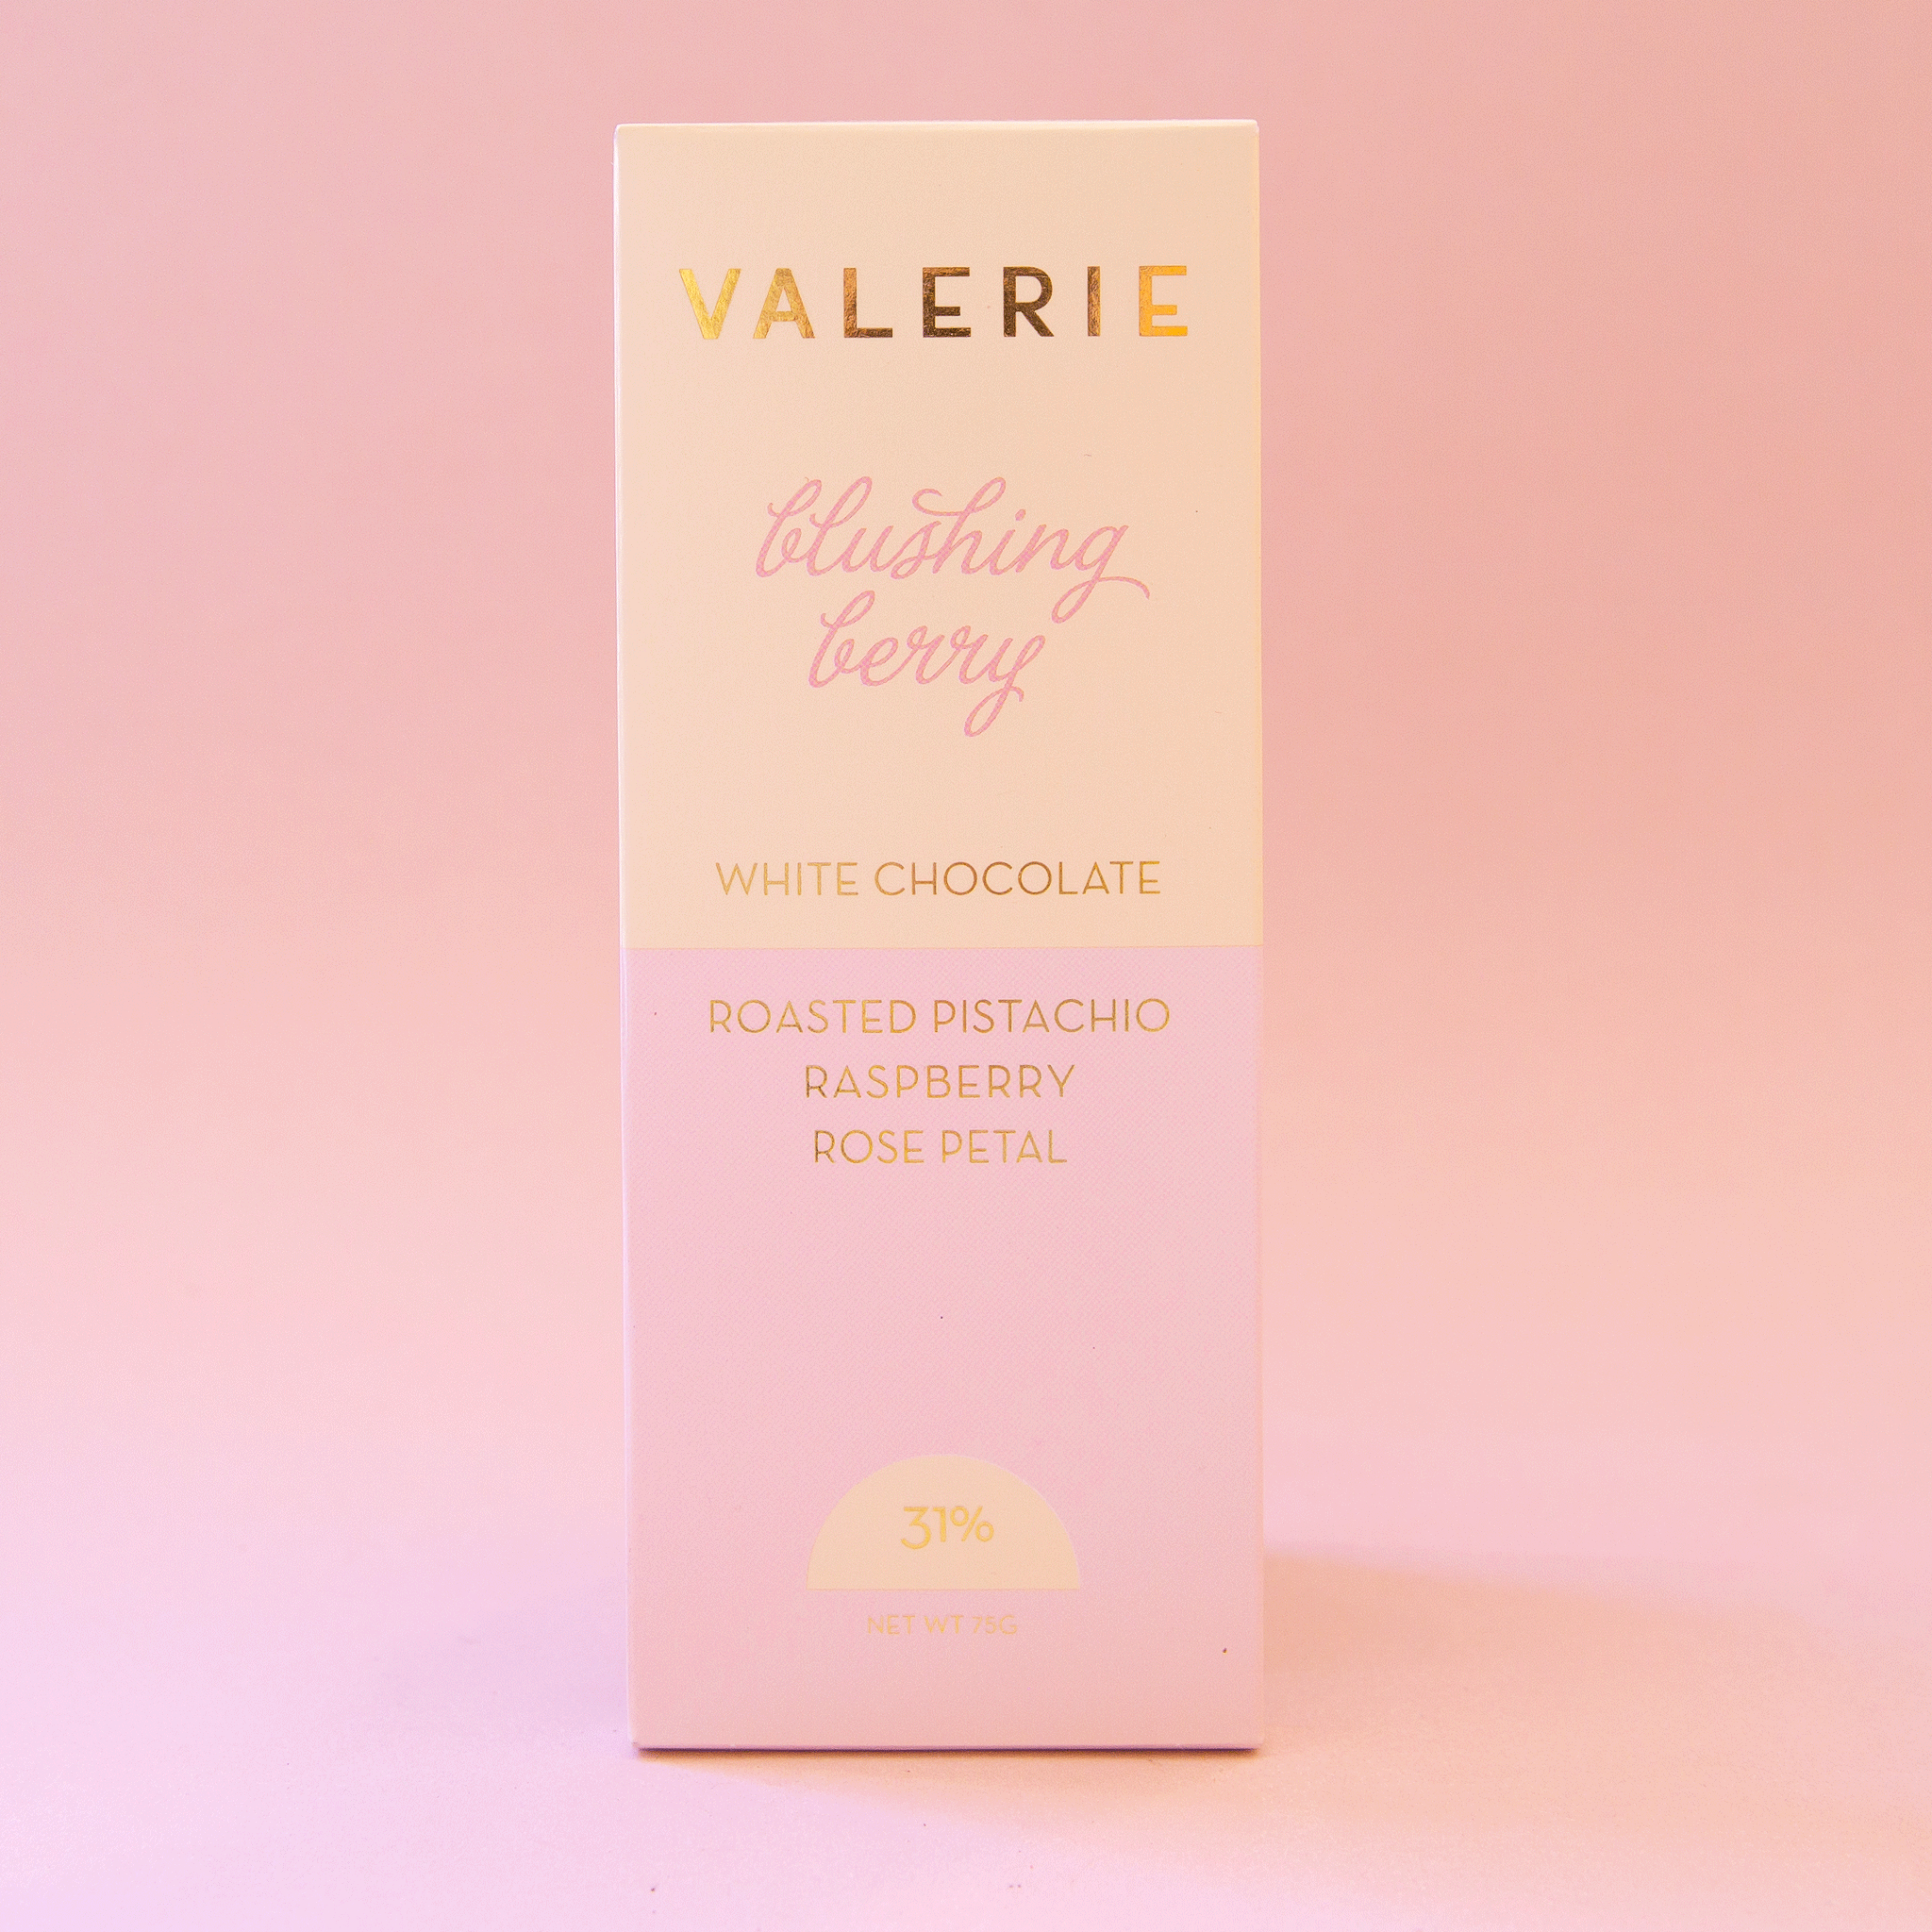 On a pink background is a light pink and ivory packaged white chocolate bar that reads, &quot;Valerie blushing berry White Chocolate Roasted Pistachio, Raspberry, Rose Petal&quot;.